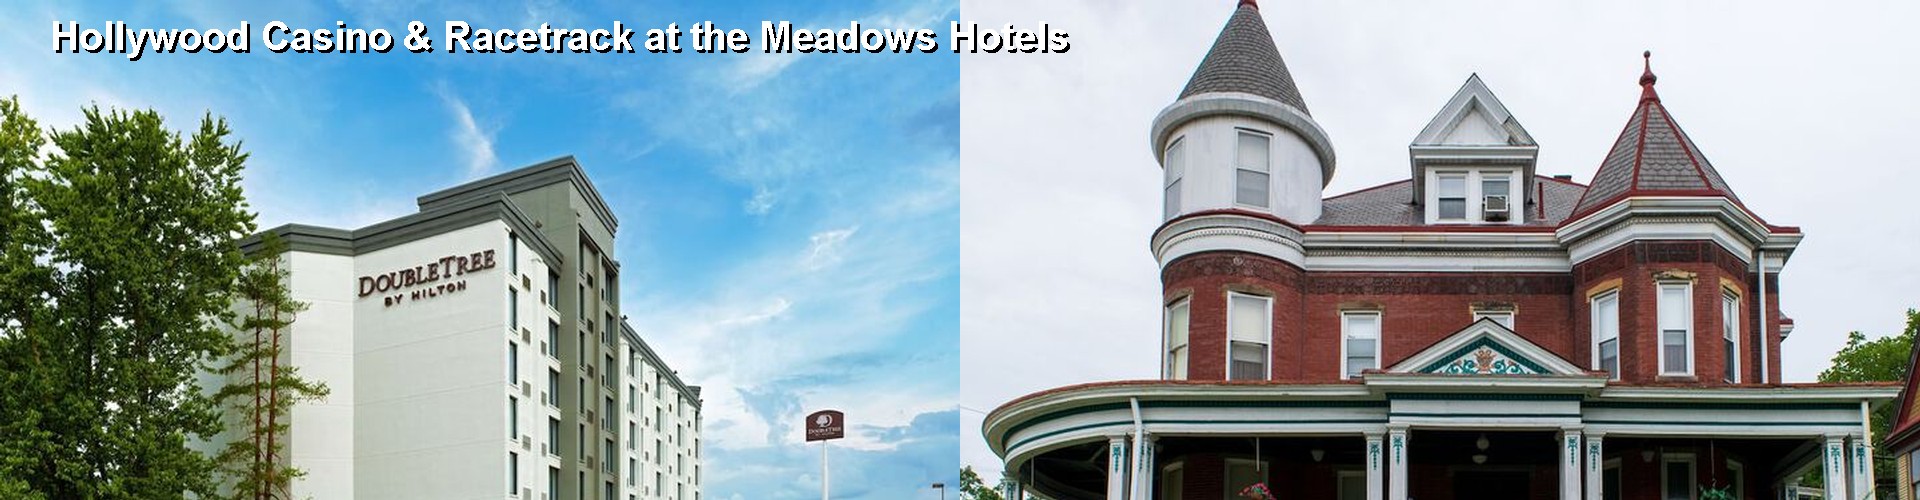 5 Best Hotels near Hollywood Casino & Racetrack at the Meadows